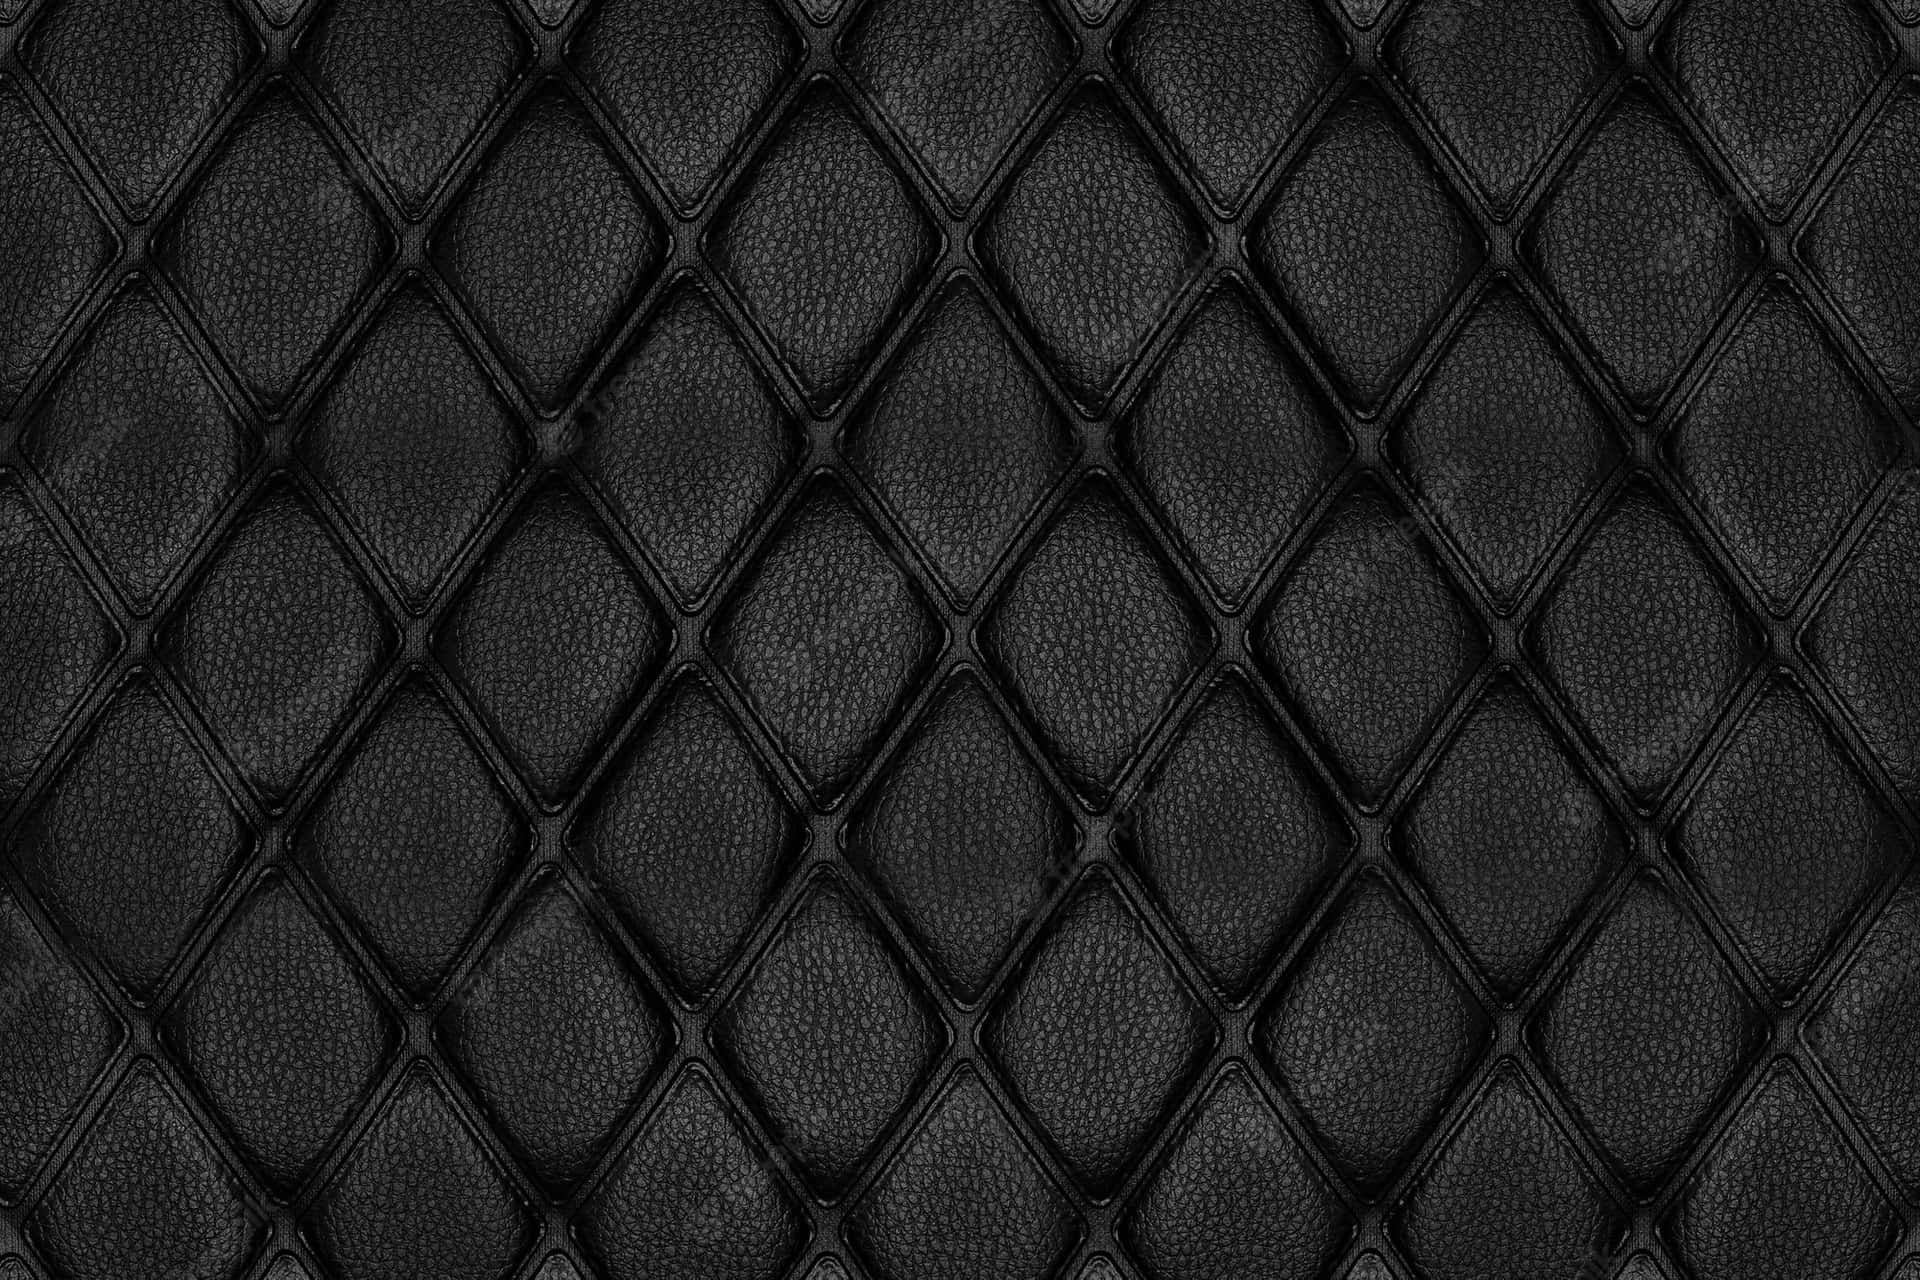 Black Leather Texture With Diamonds Wallpaper